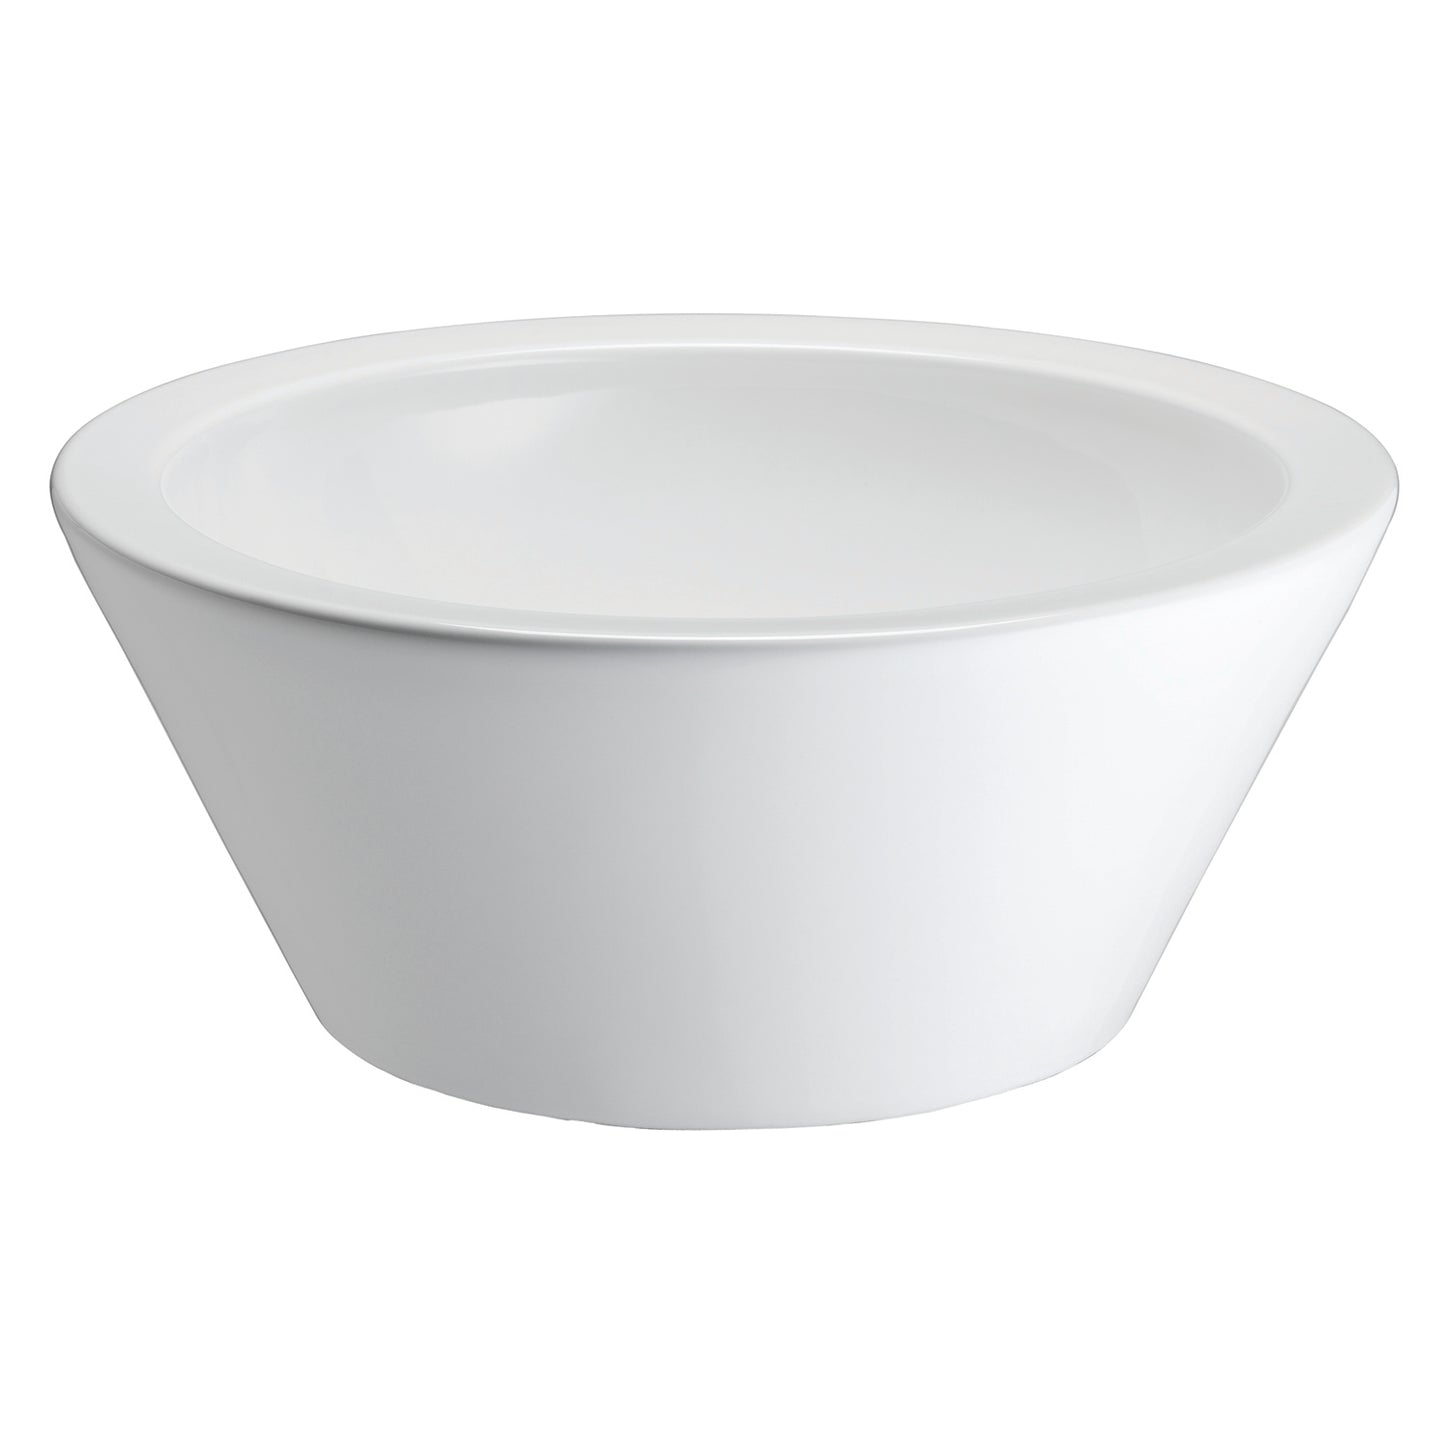 Marina Vessel Basin Sink with No Overflow White